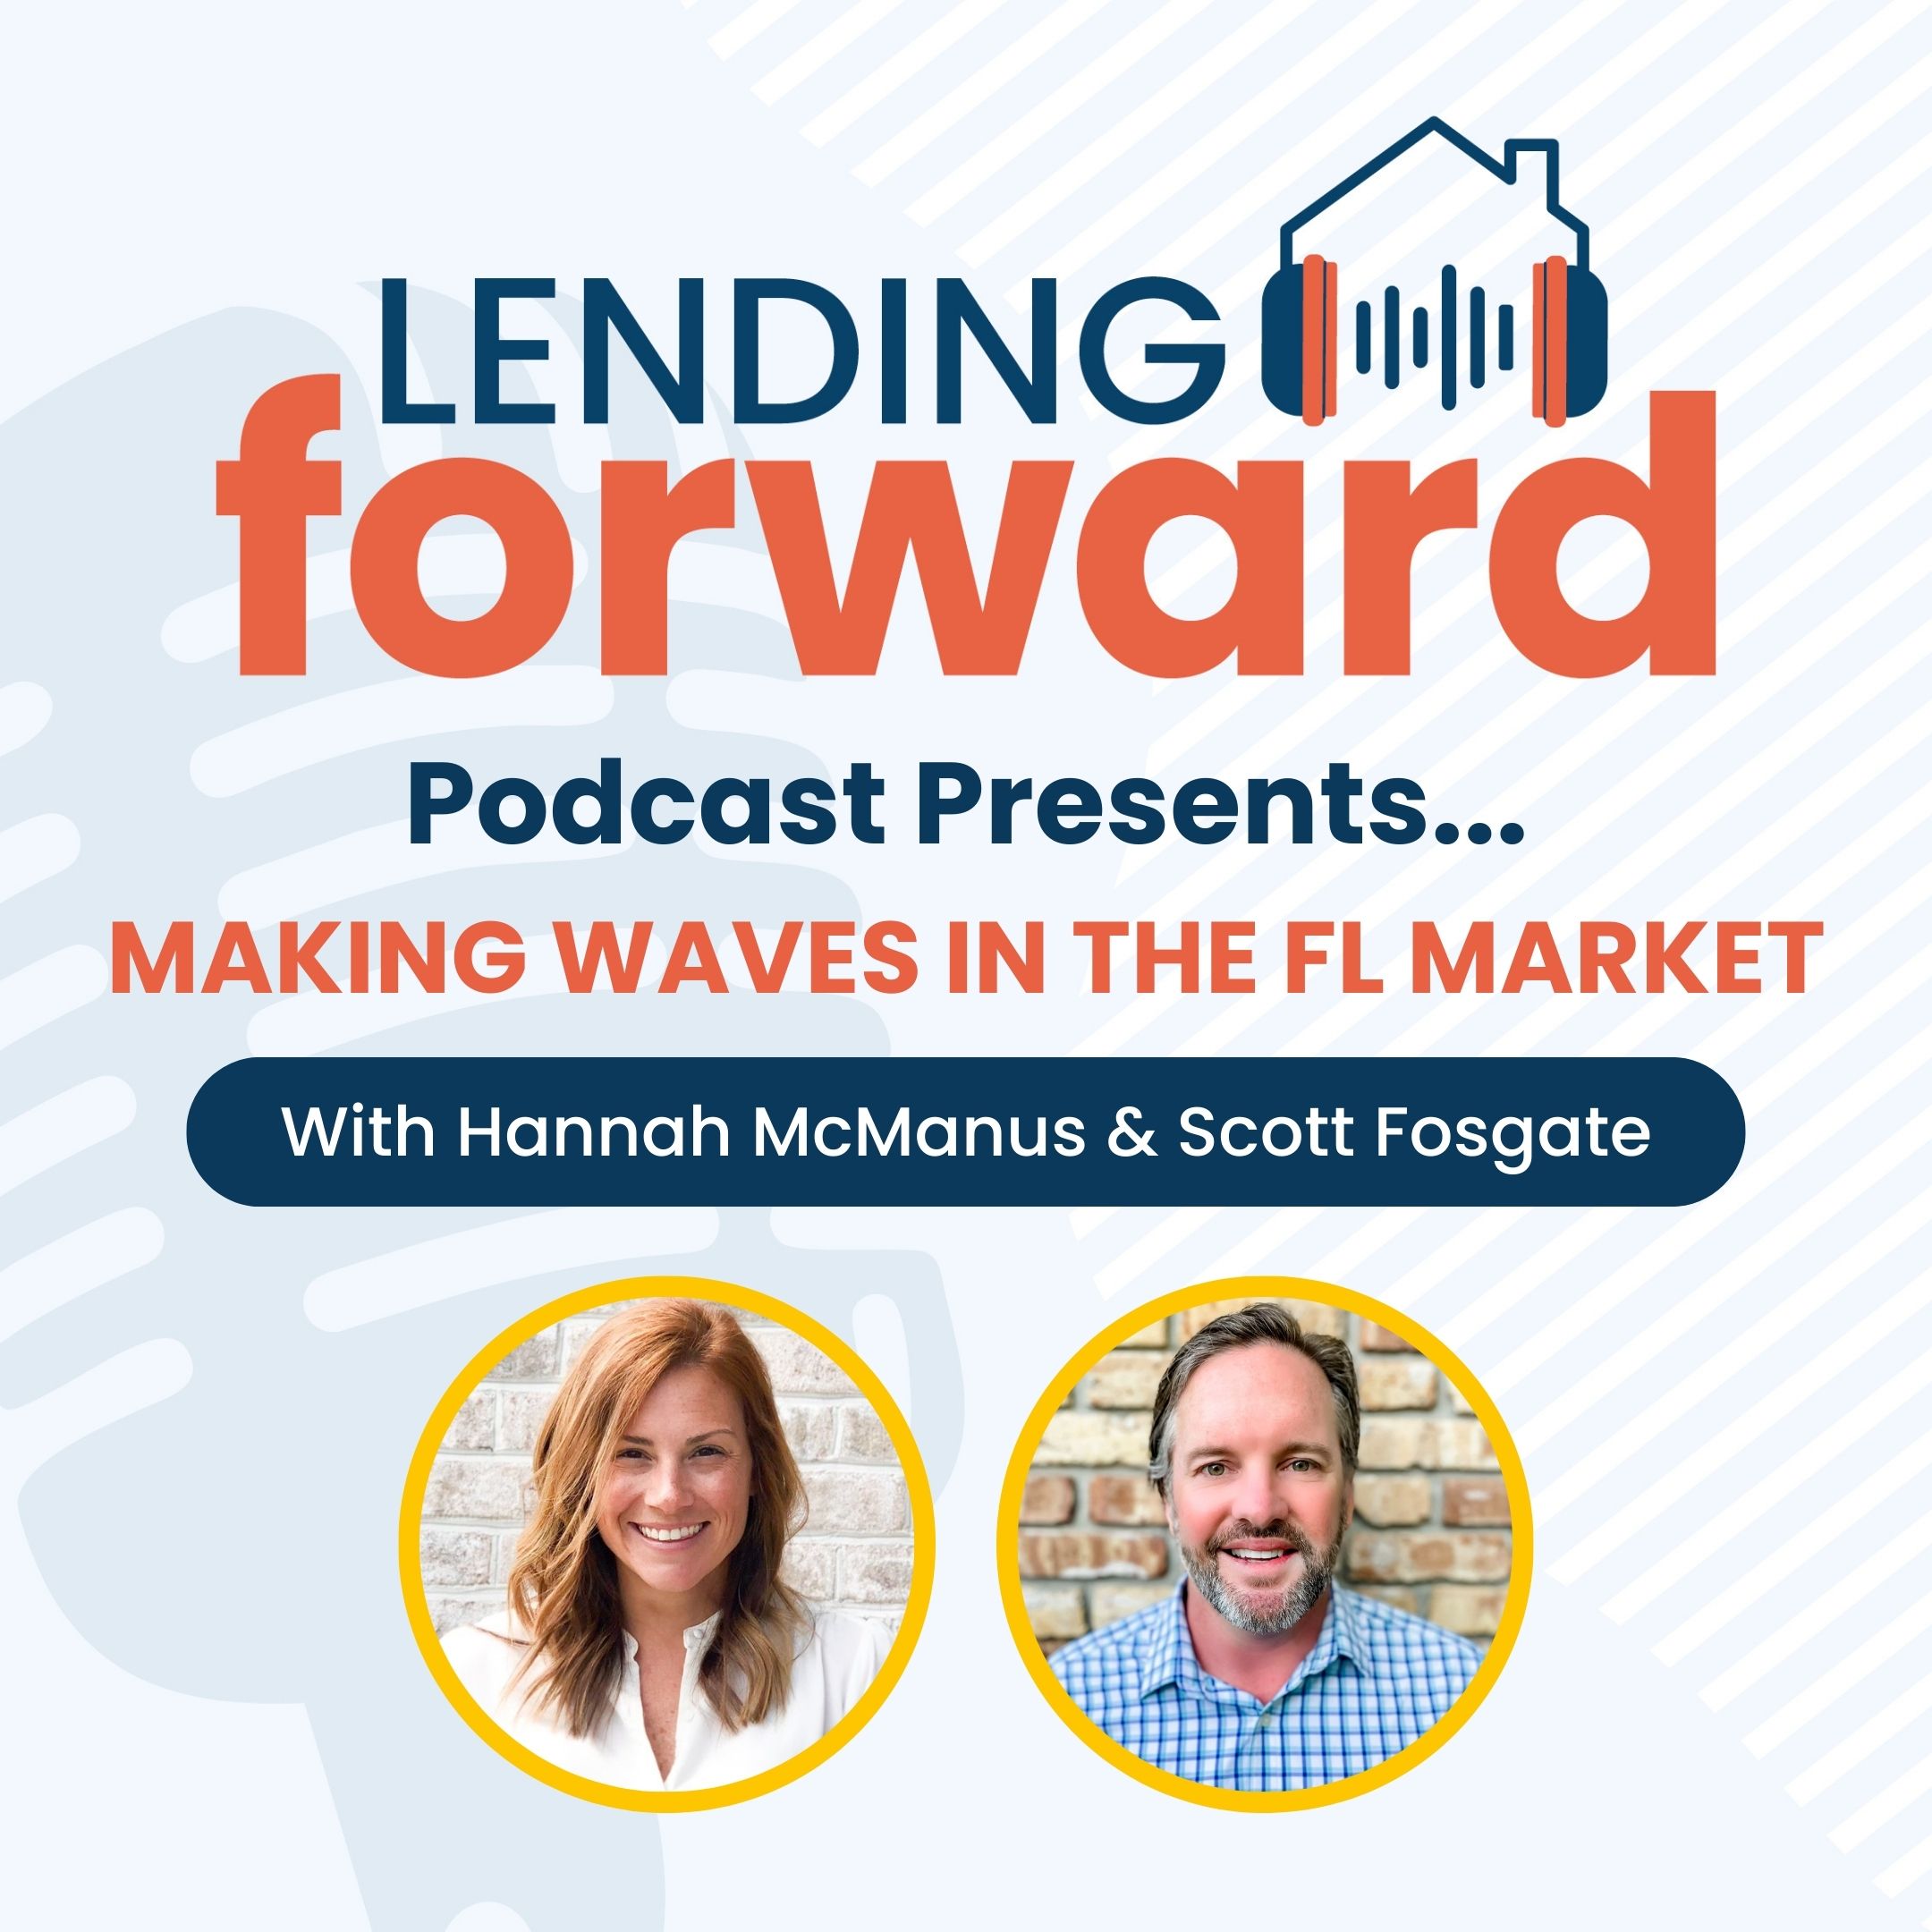 Making Waves in the Florida Market with Hannah McManus & Scott Fosgate